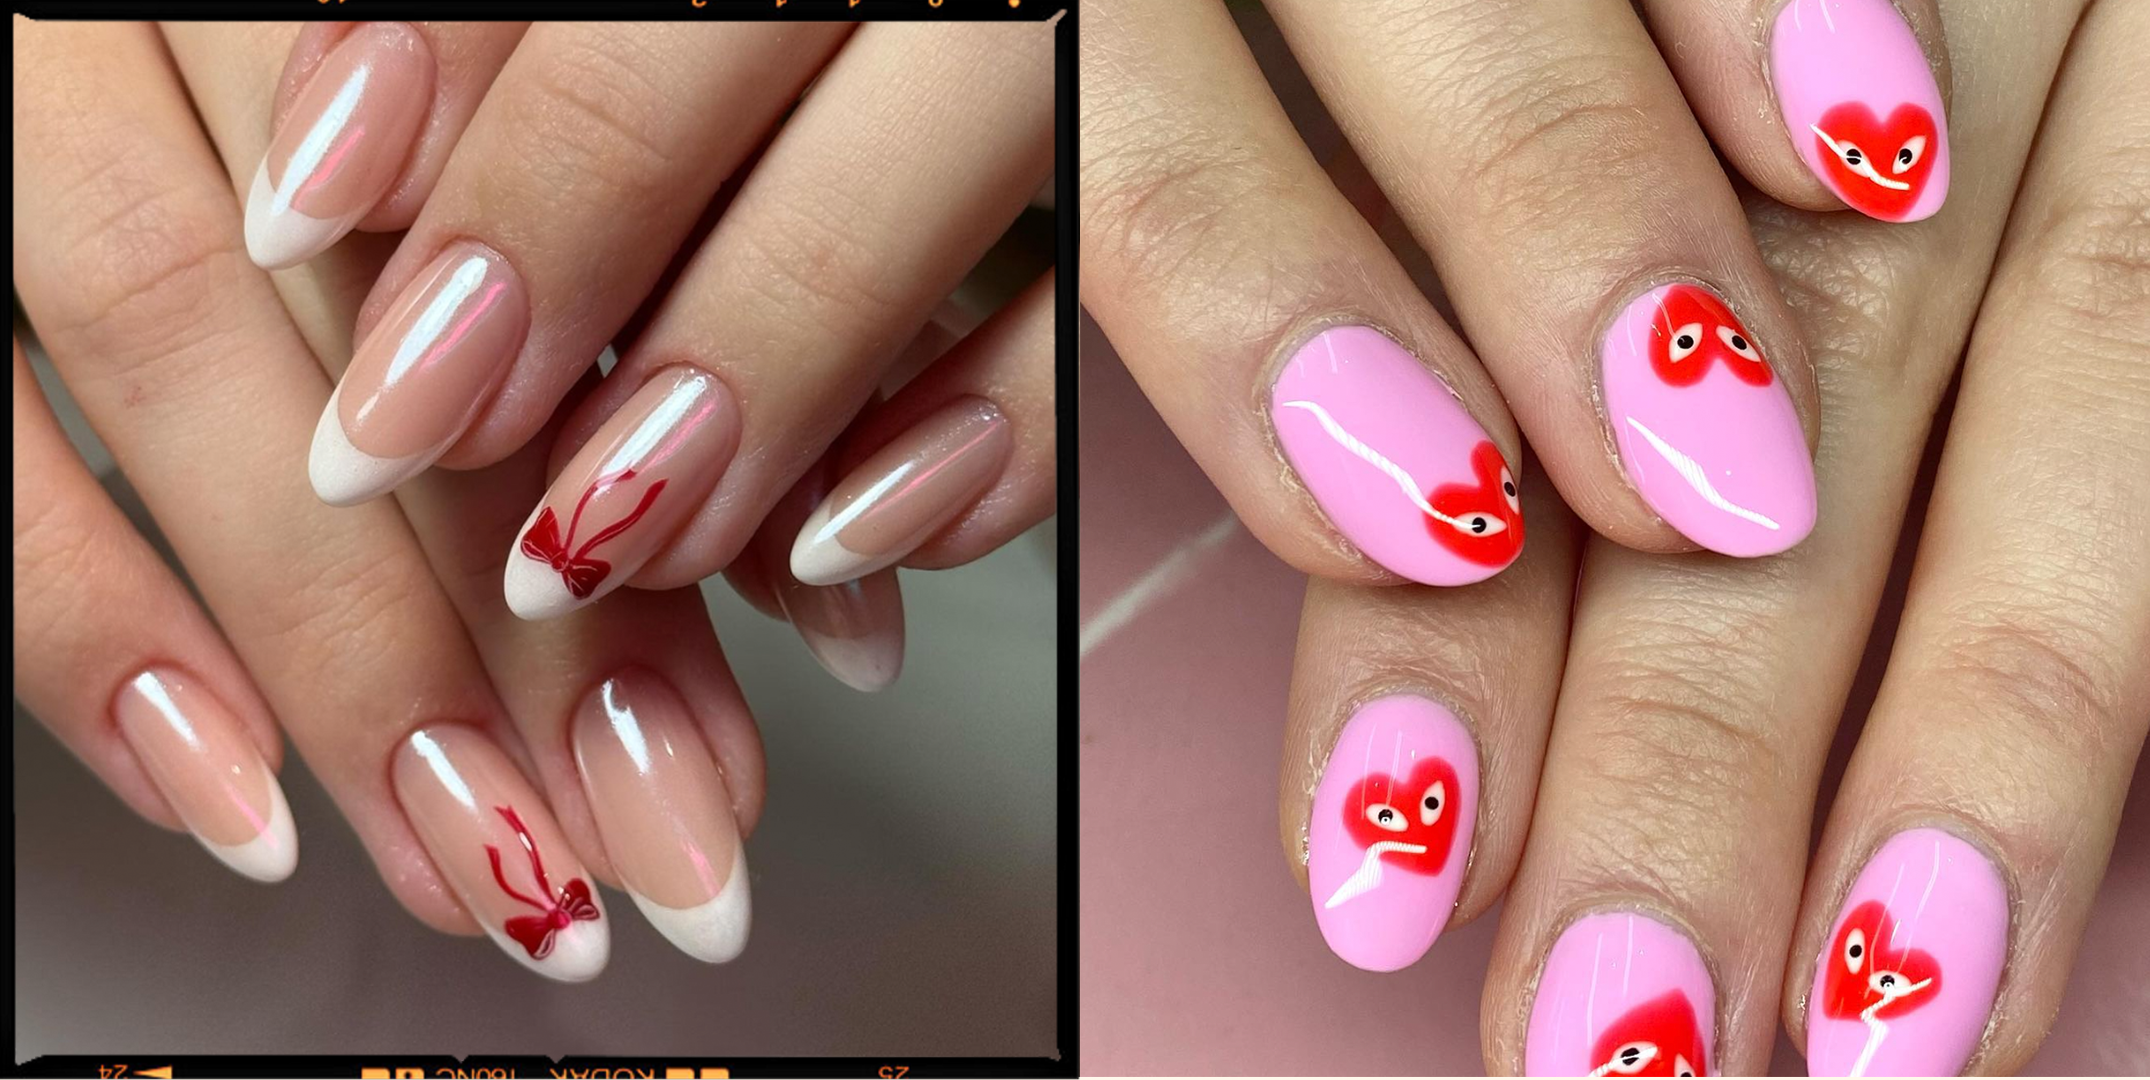 16,697 Cute Nail Designs Royalty-Free Photos and Stock Images | Shutterstock